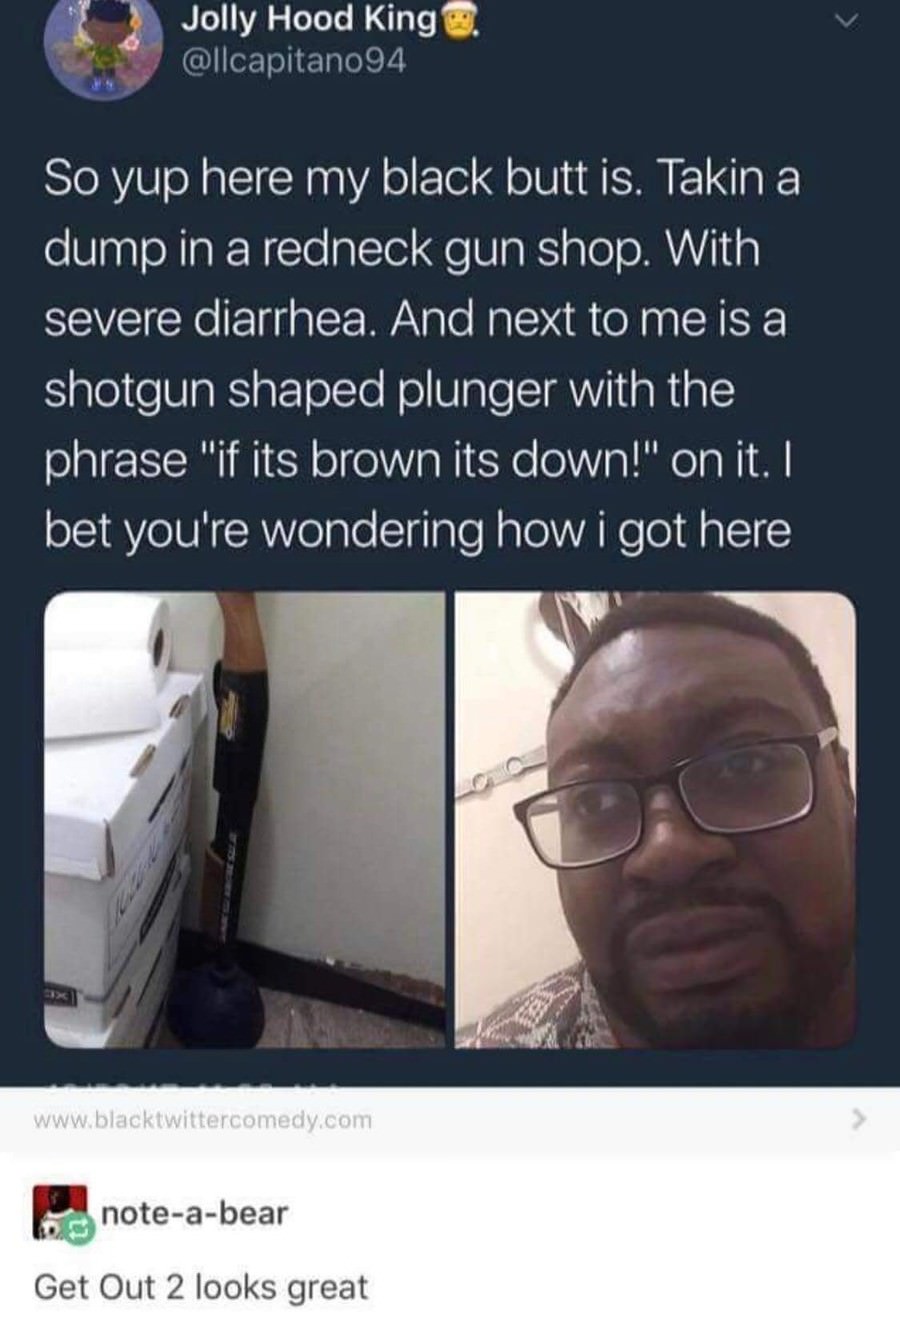 if its brown its down plunger - Jolly Hood King. So yup here my black butt is. Takin a dump in a redneck gun shop. With severe diarrhea. And next to me is a shotgun shaped plunger with the phrase "if its brown its down!" on it. I bet you're wondering how 